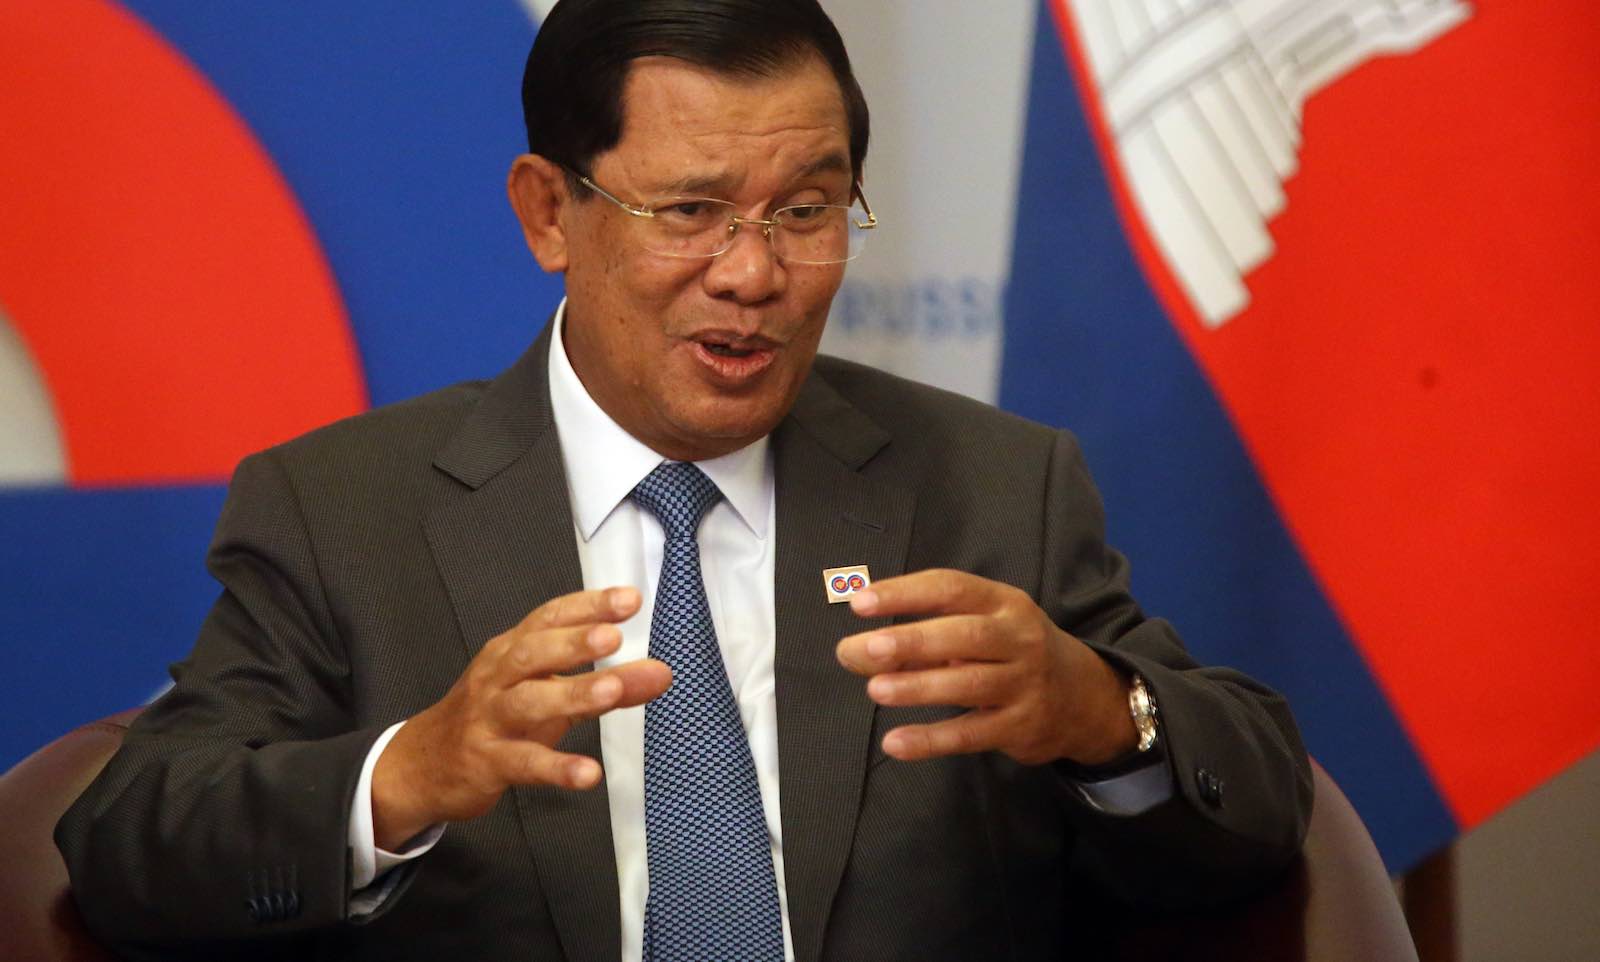 Cambodian PM Hun Sen asked: “Why would someone else’s son be able to become prime minister and the son of Hun Sen not be able to?”